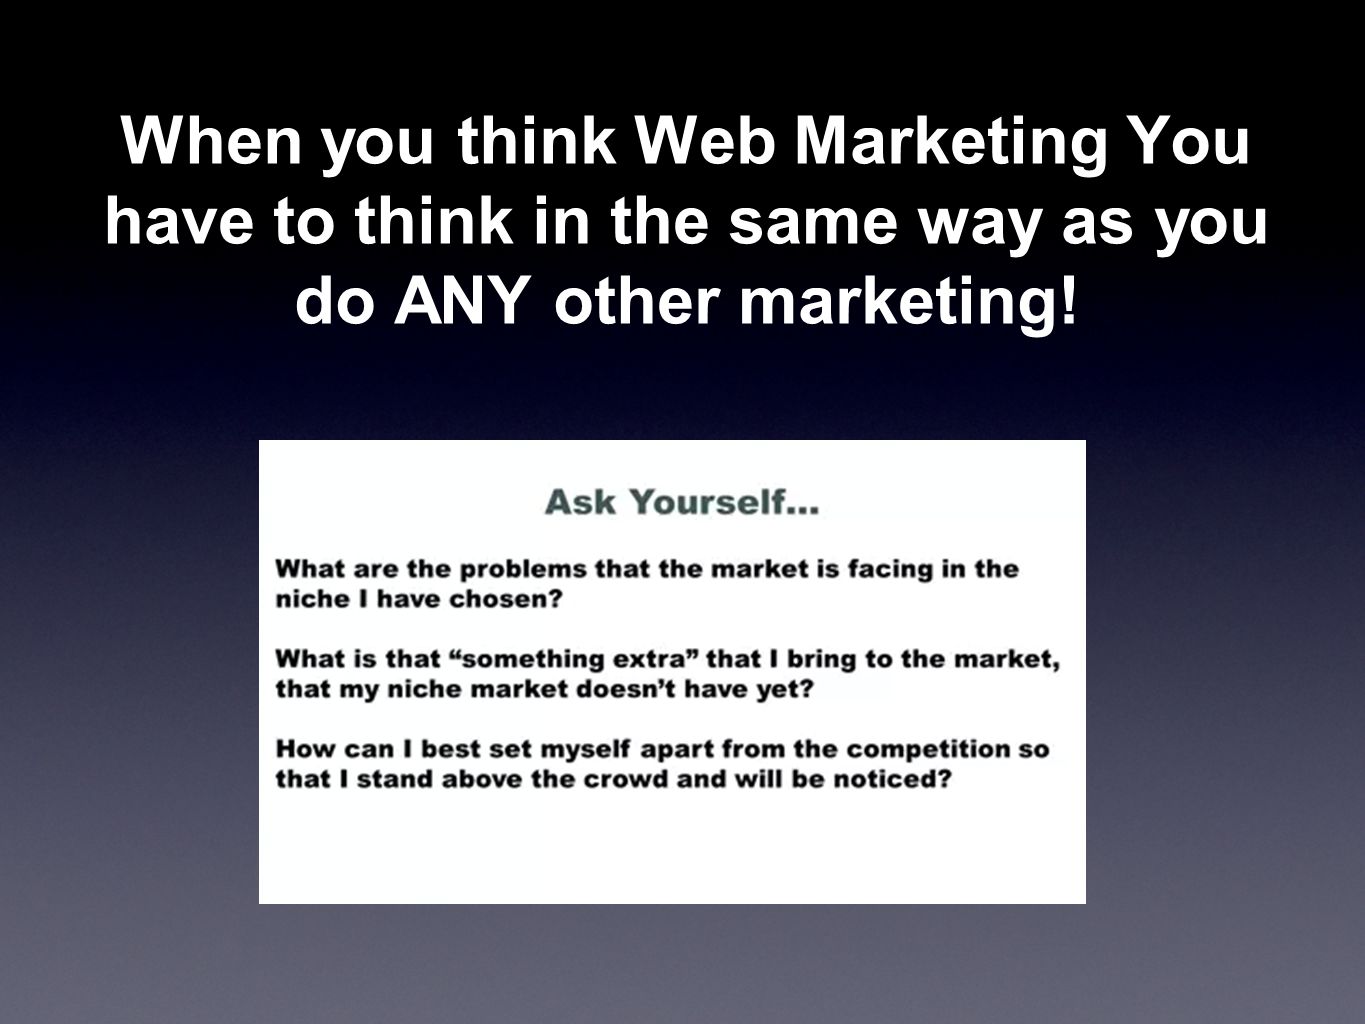 When you think Web Marketing You have to think in the same way as you do ANY other marketing!